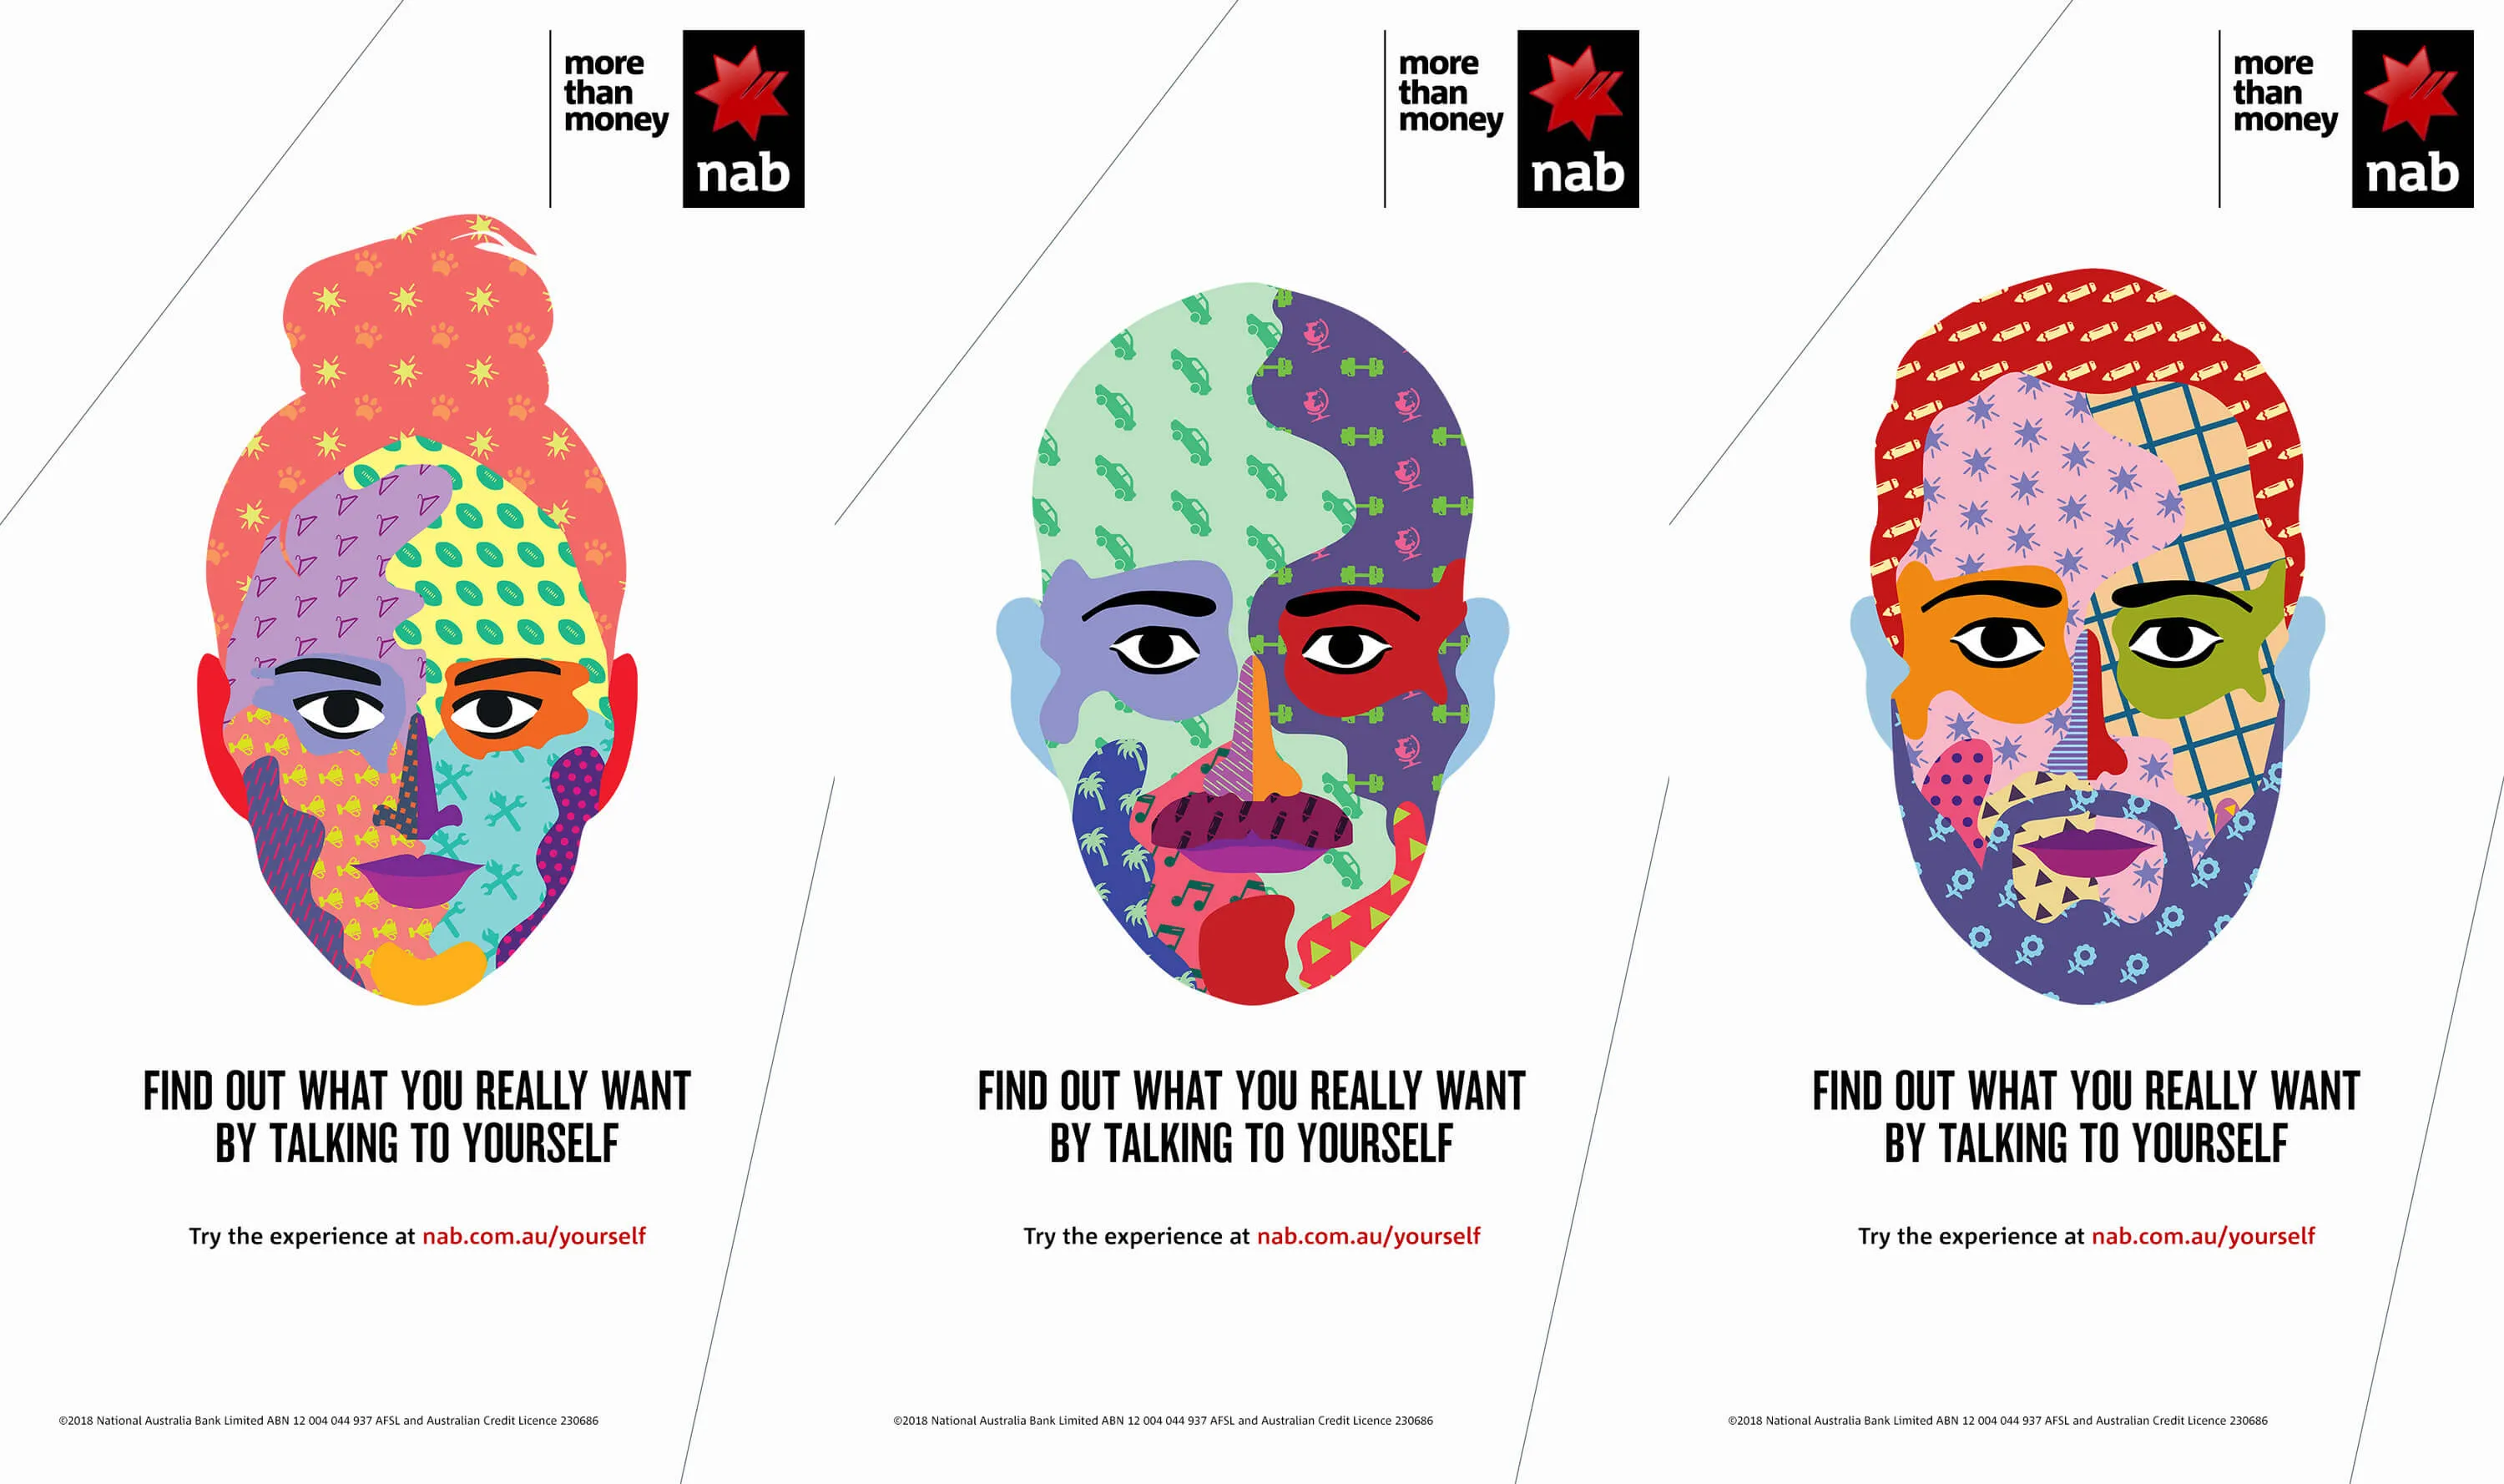 Campaign posters showing three generated faces